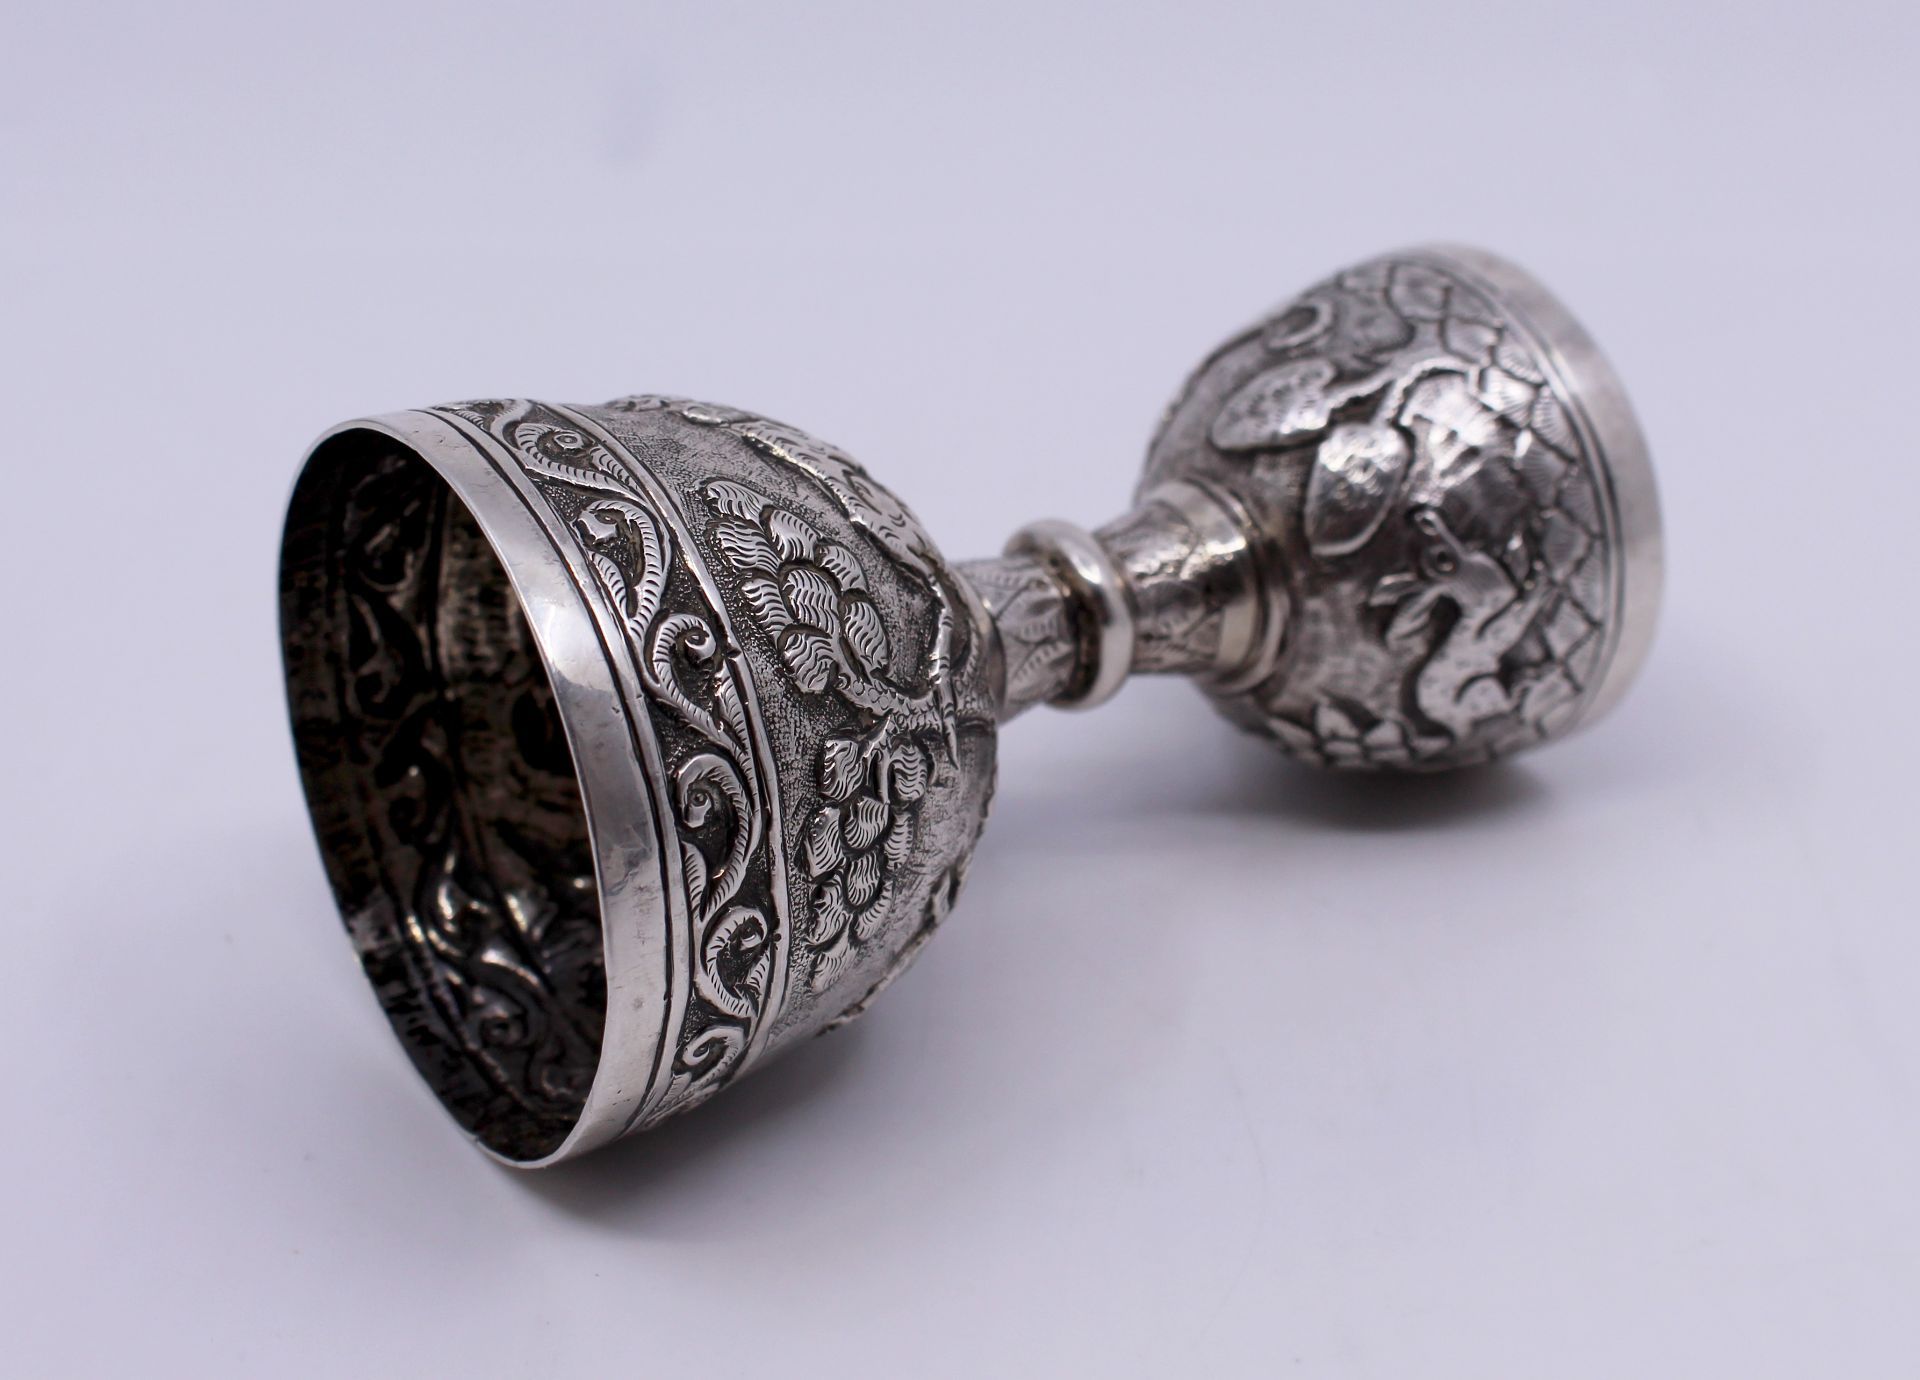 Late 19th c. Indian Silver Double Ended Measuring Cup - Image 3 of 6